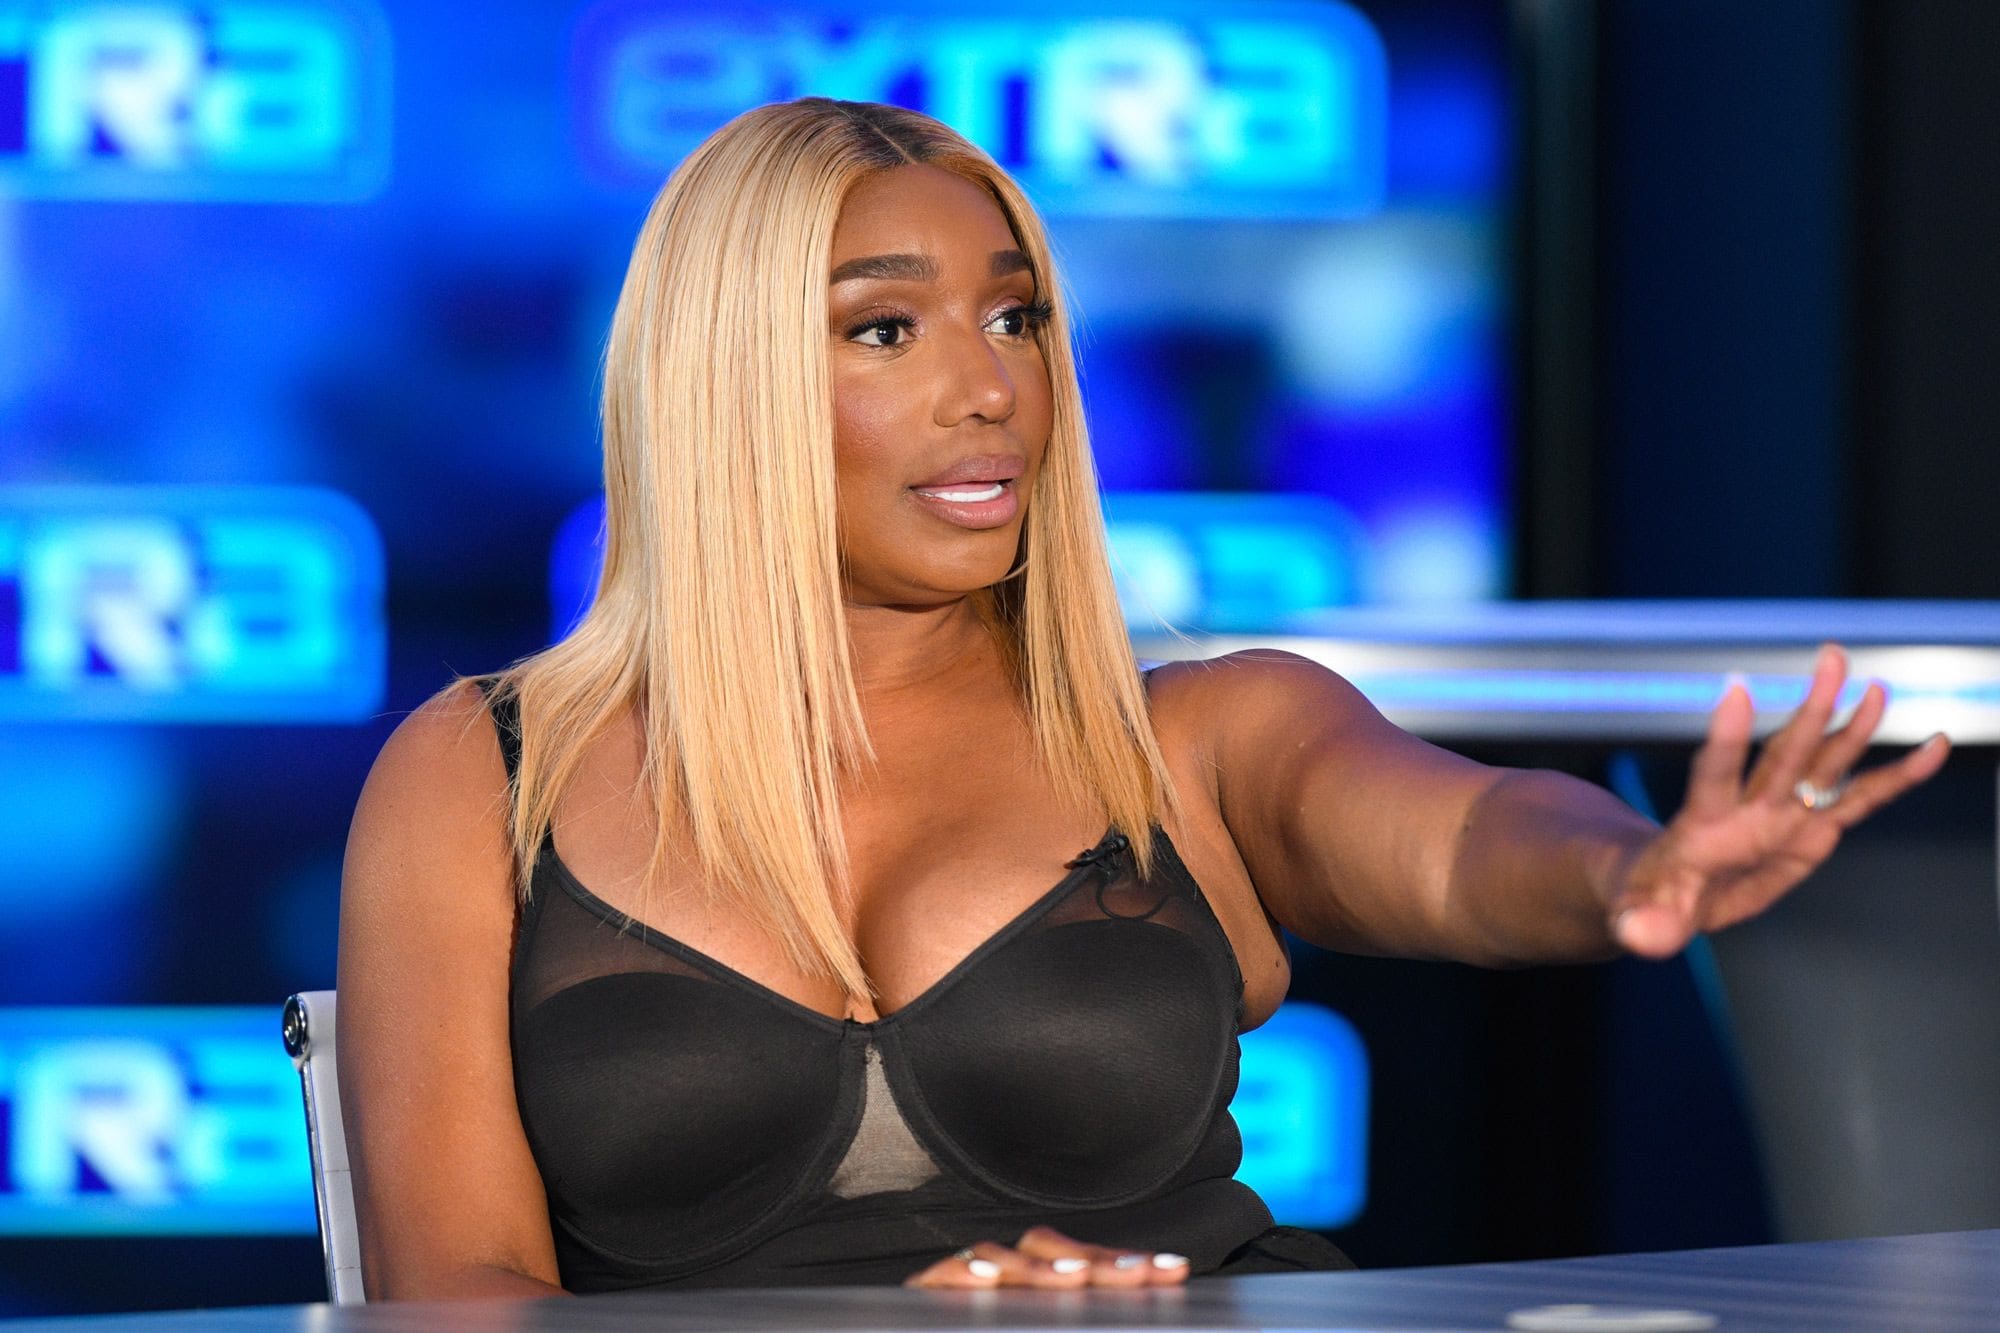 NeNe Leakes Shows Off One Of Her Favorite Looks - See Her Pics Her